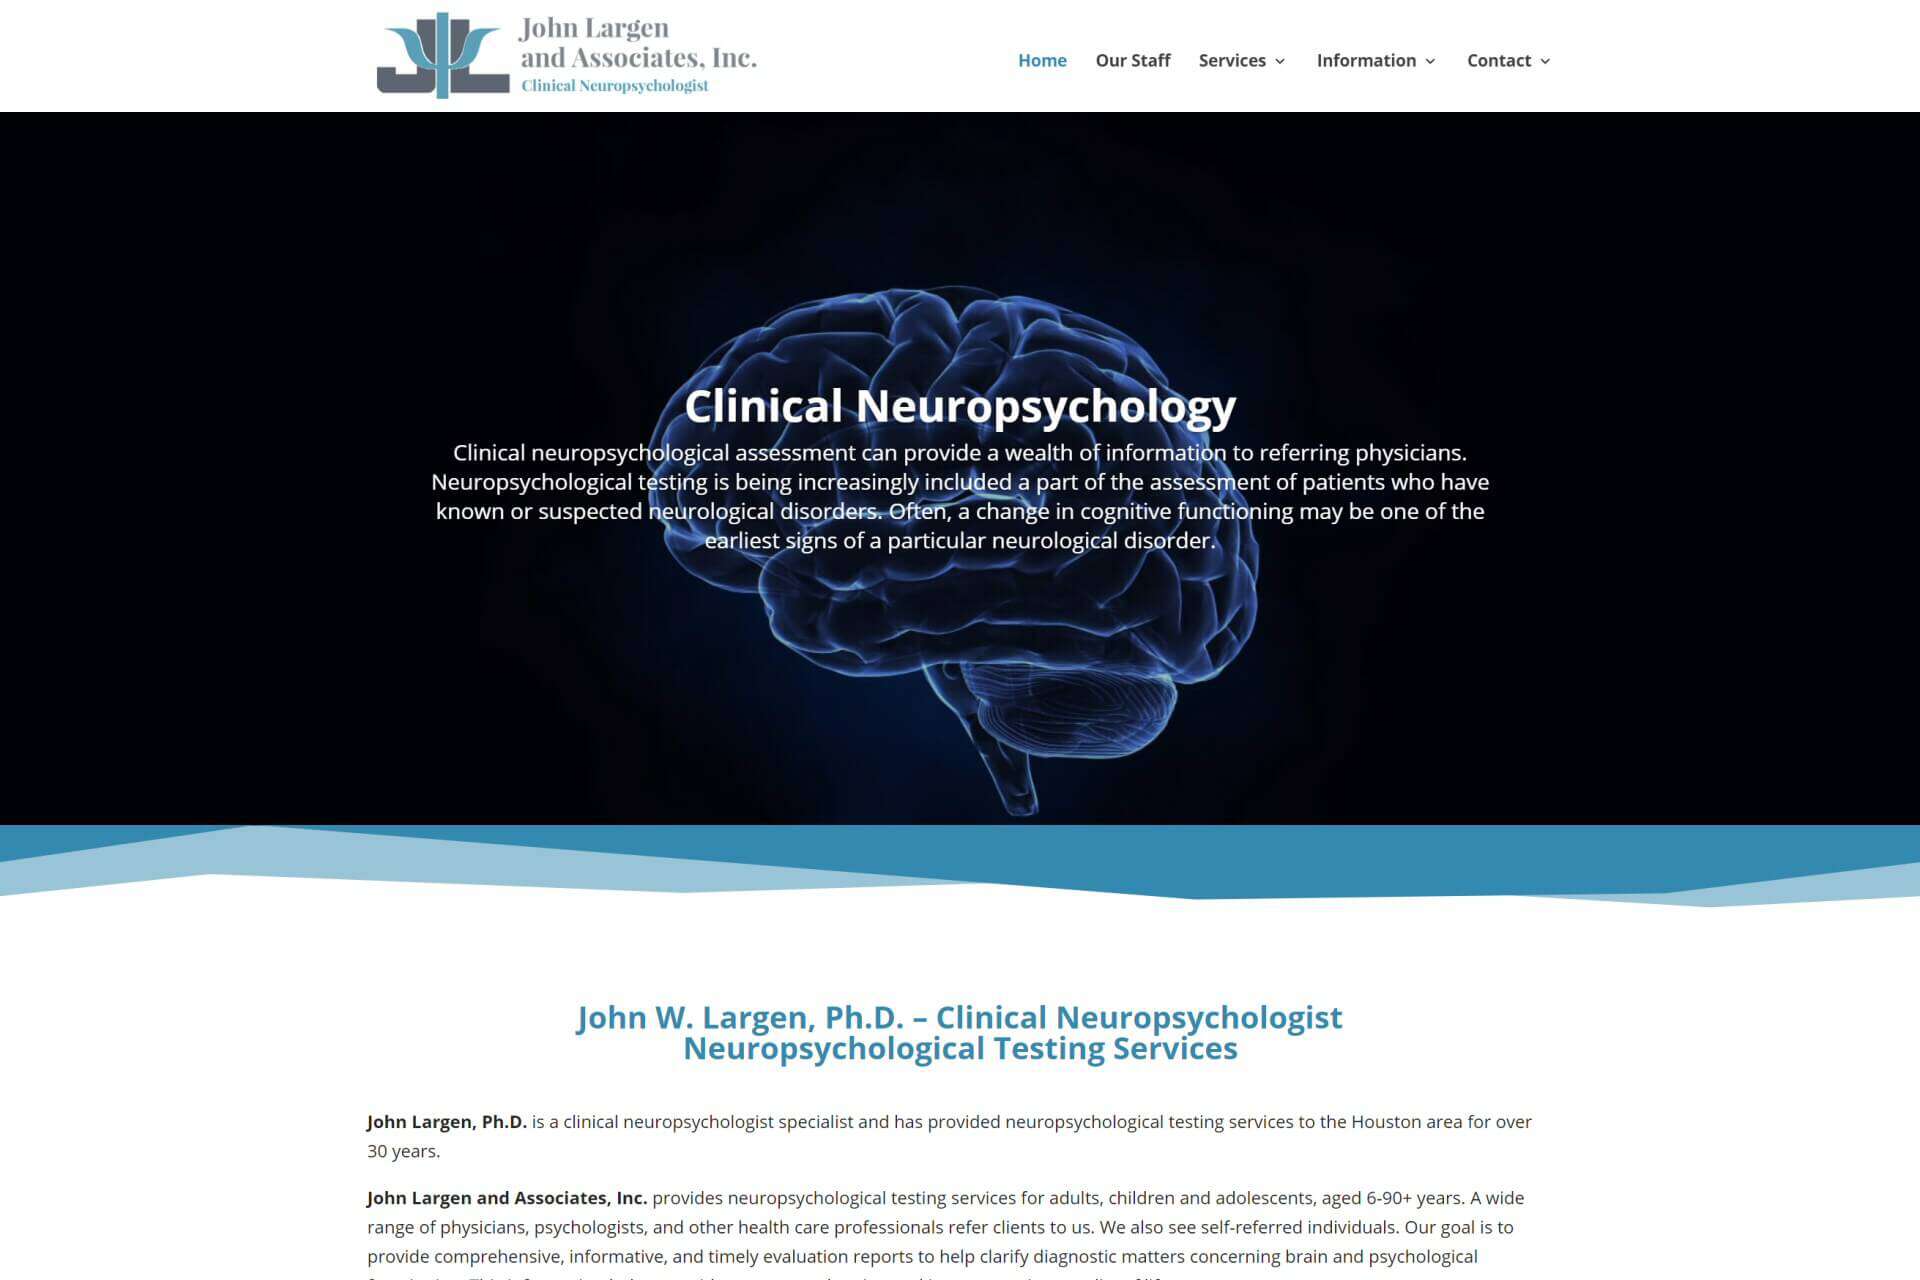 John W. Largen & Associates Neuropsychological Testing Services by All Star Pools